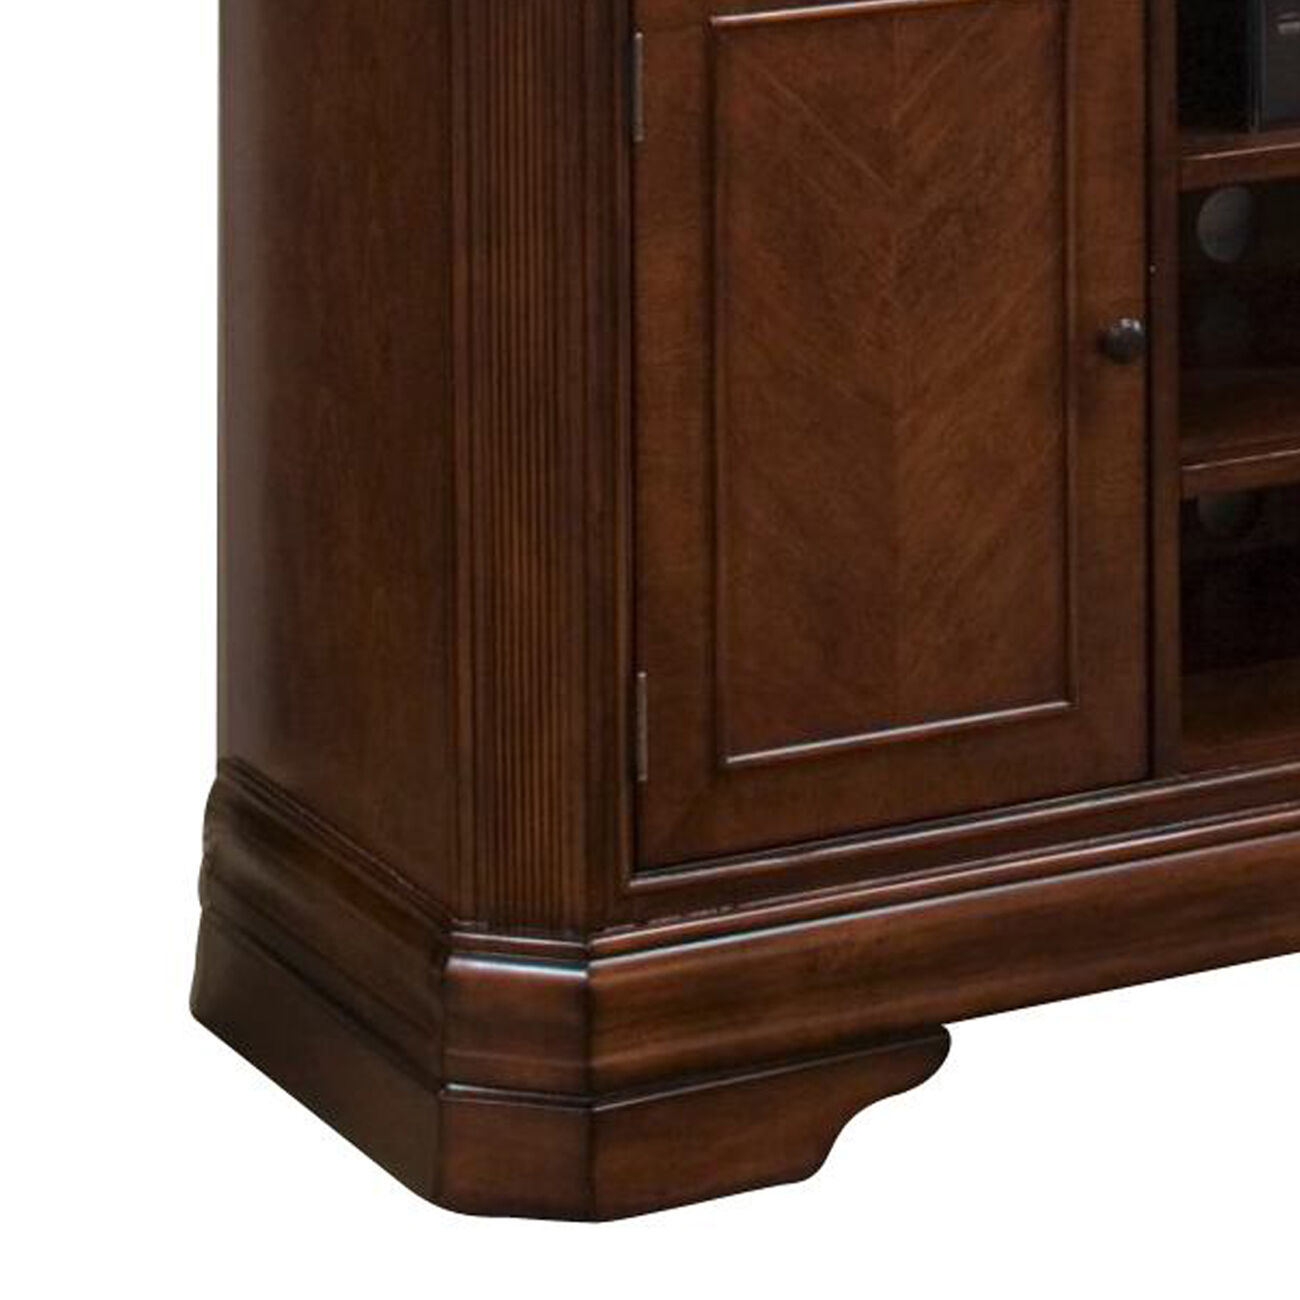 3 Drawer and 2 Door TV Console with Open Compartments, Brown